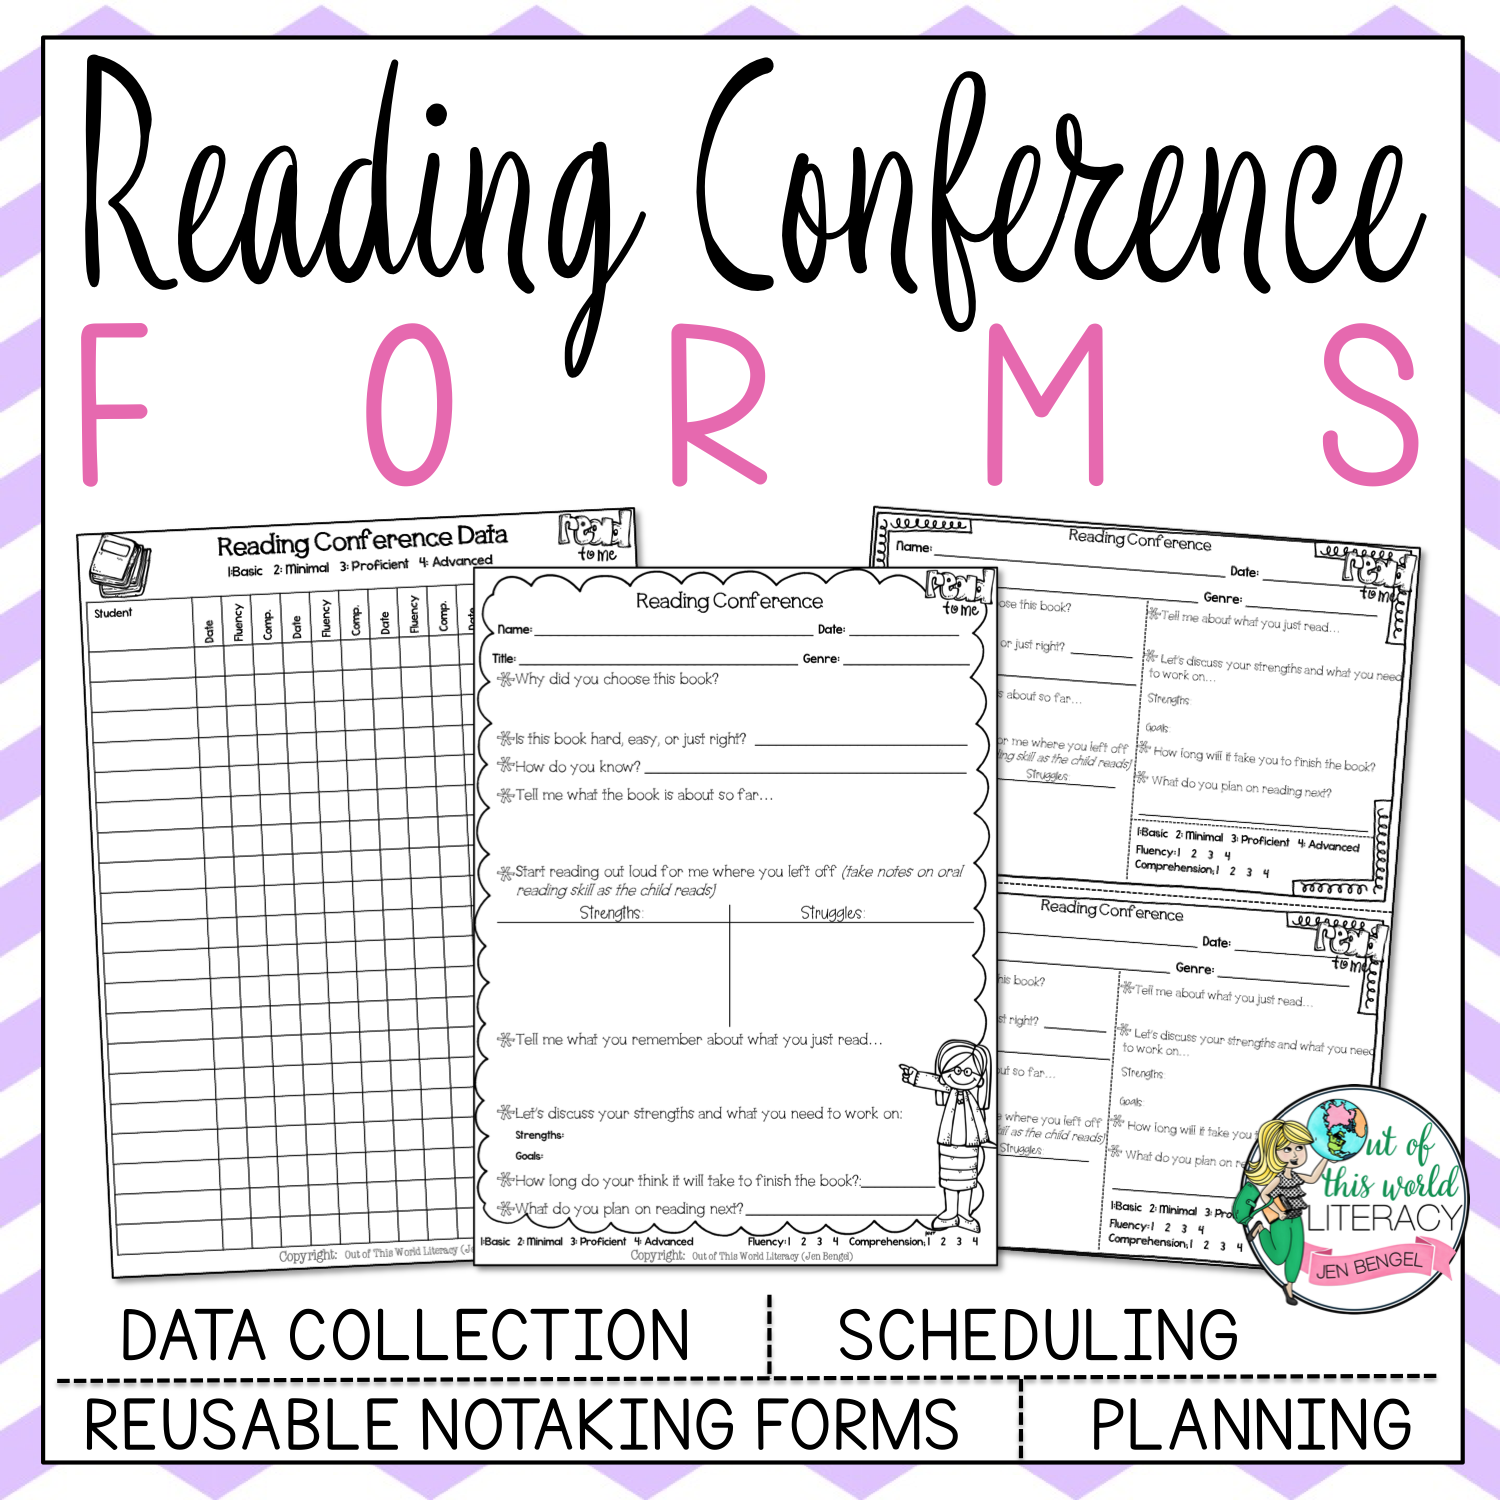 Forms of reading. Note taking Strategies in reading. Read 2 form. Reading recording. Start to read or start reading